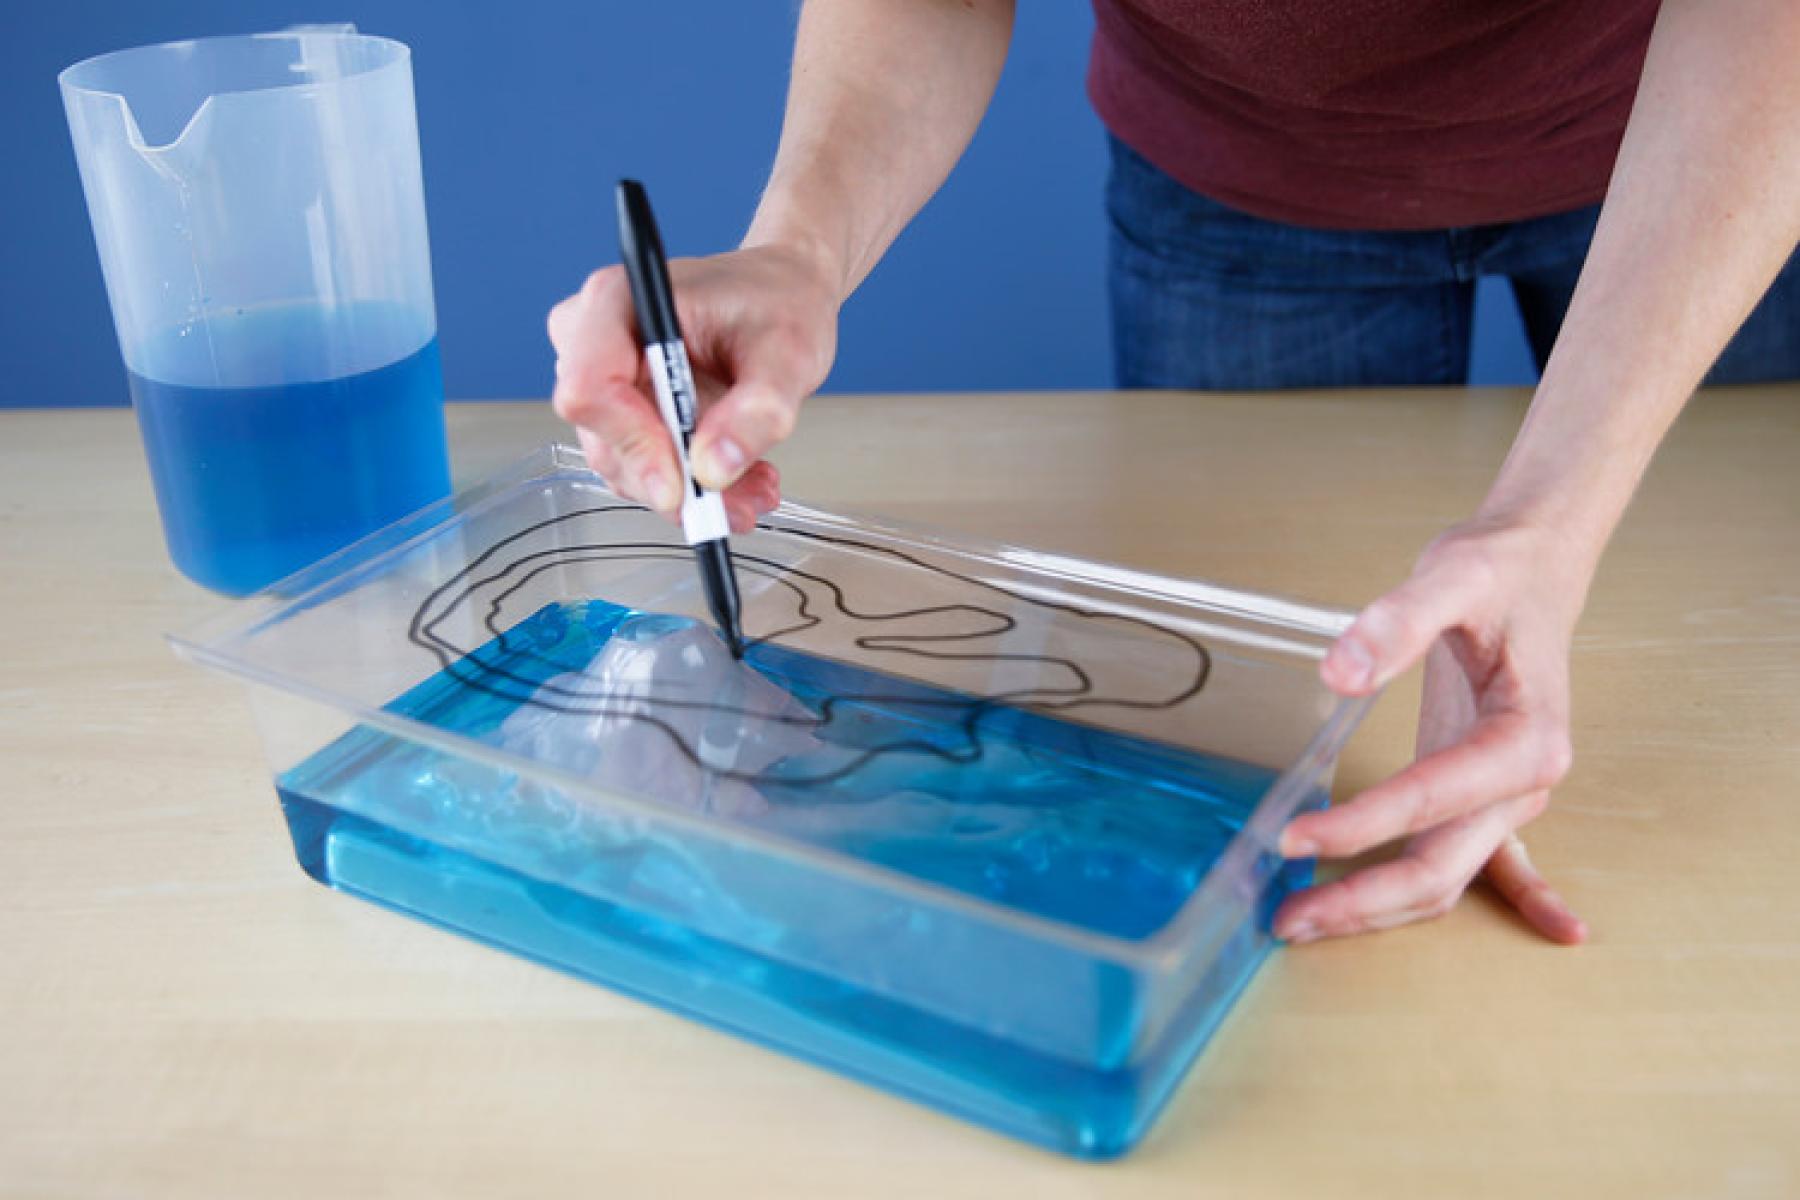 Rising Sea activity showing hands drawing contour lines on plastic box